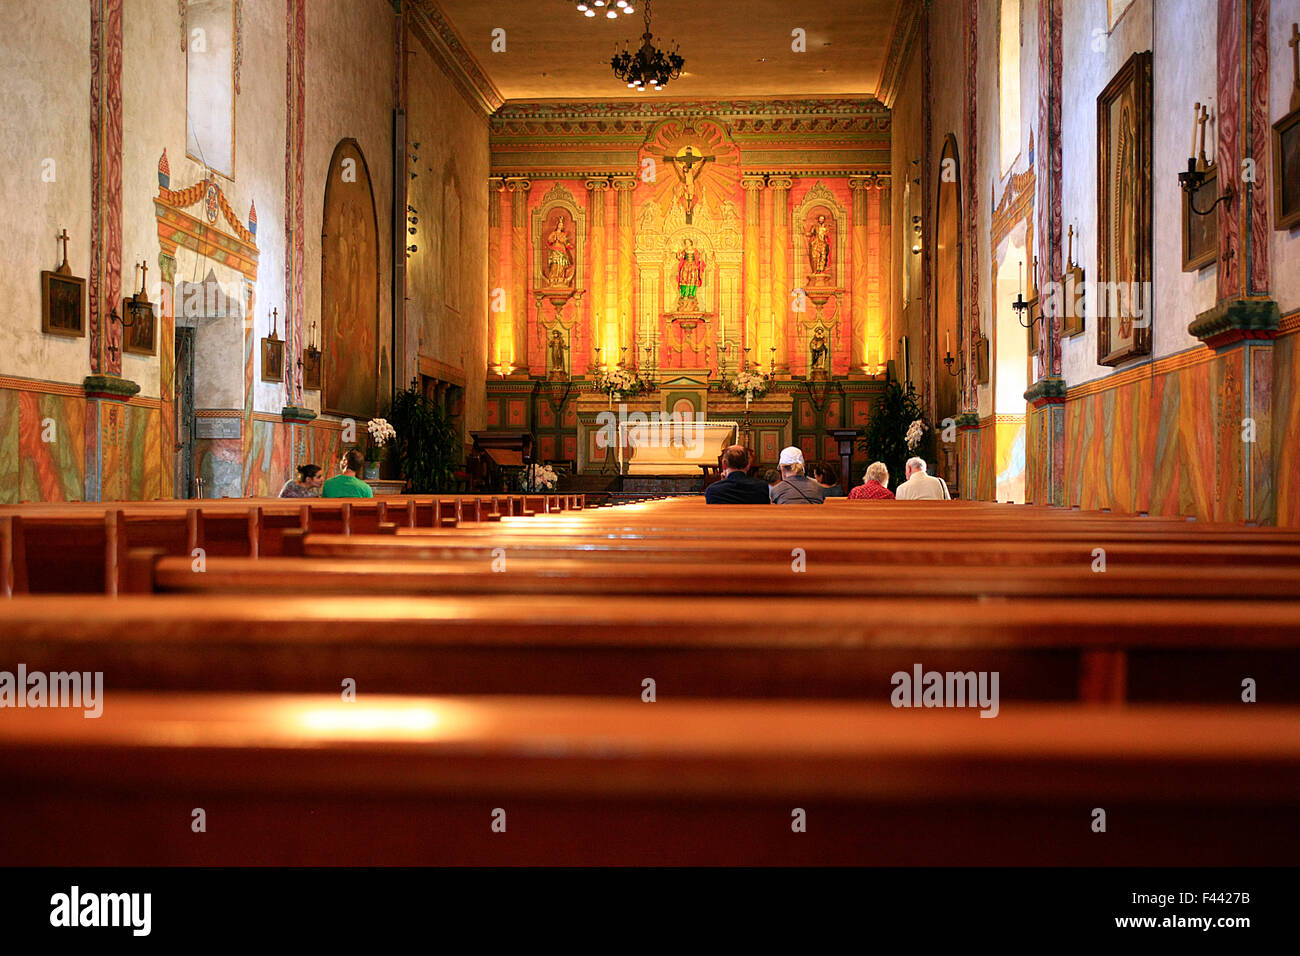 Interior of the Santa Barbara Mission Chapel in California. A Catholic church dating from 1786 but restored in 1925 Stock Photo